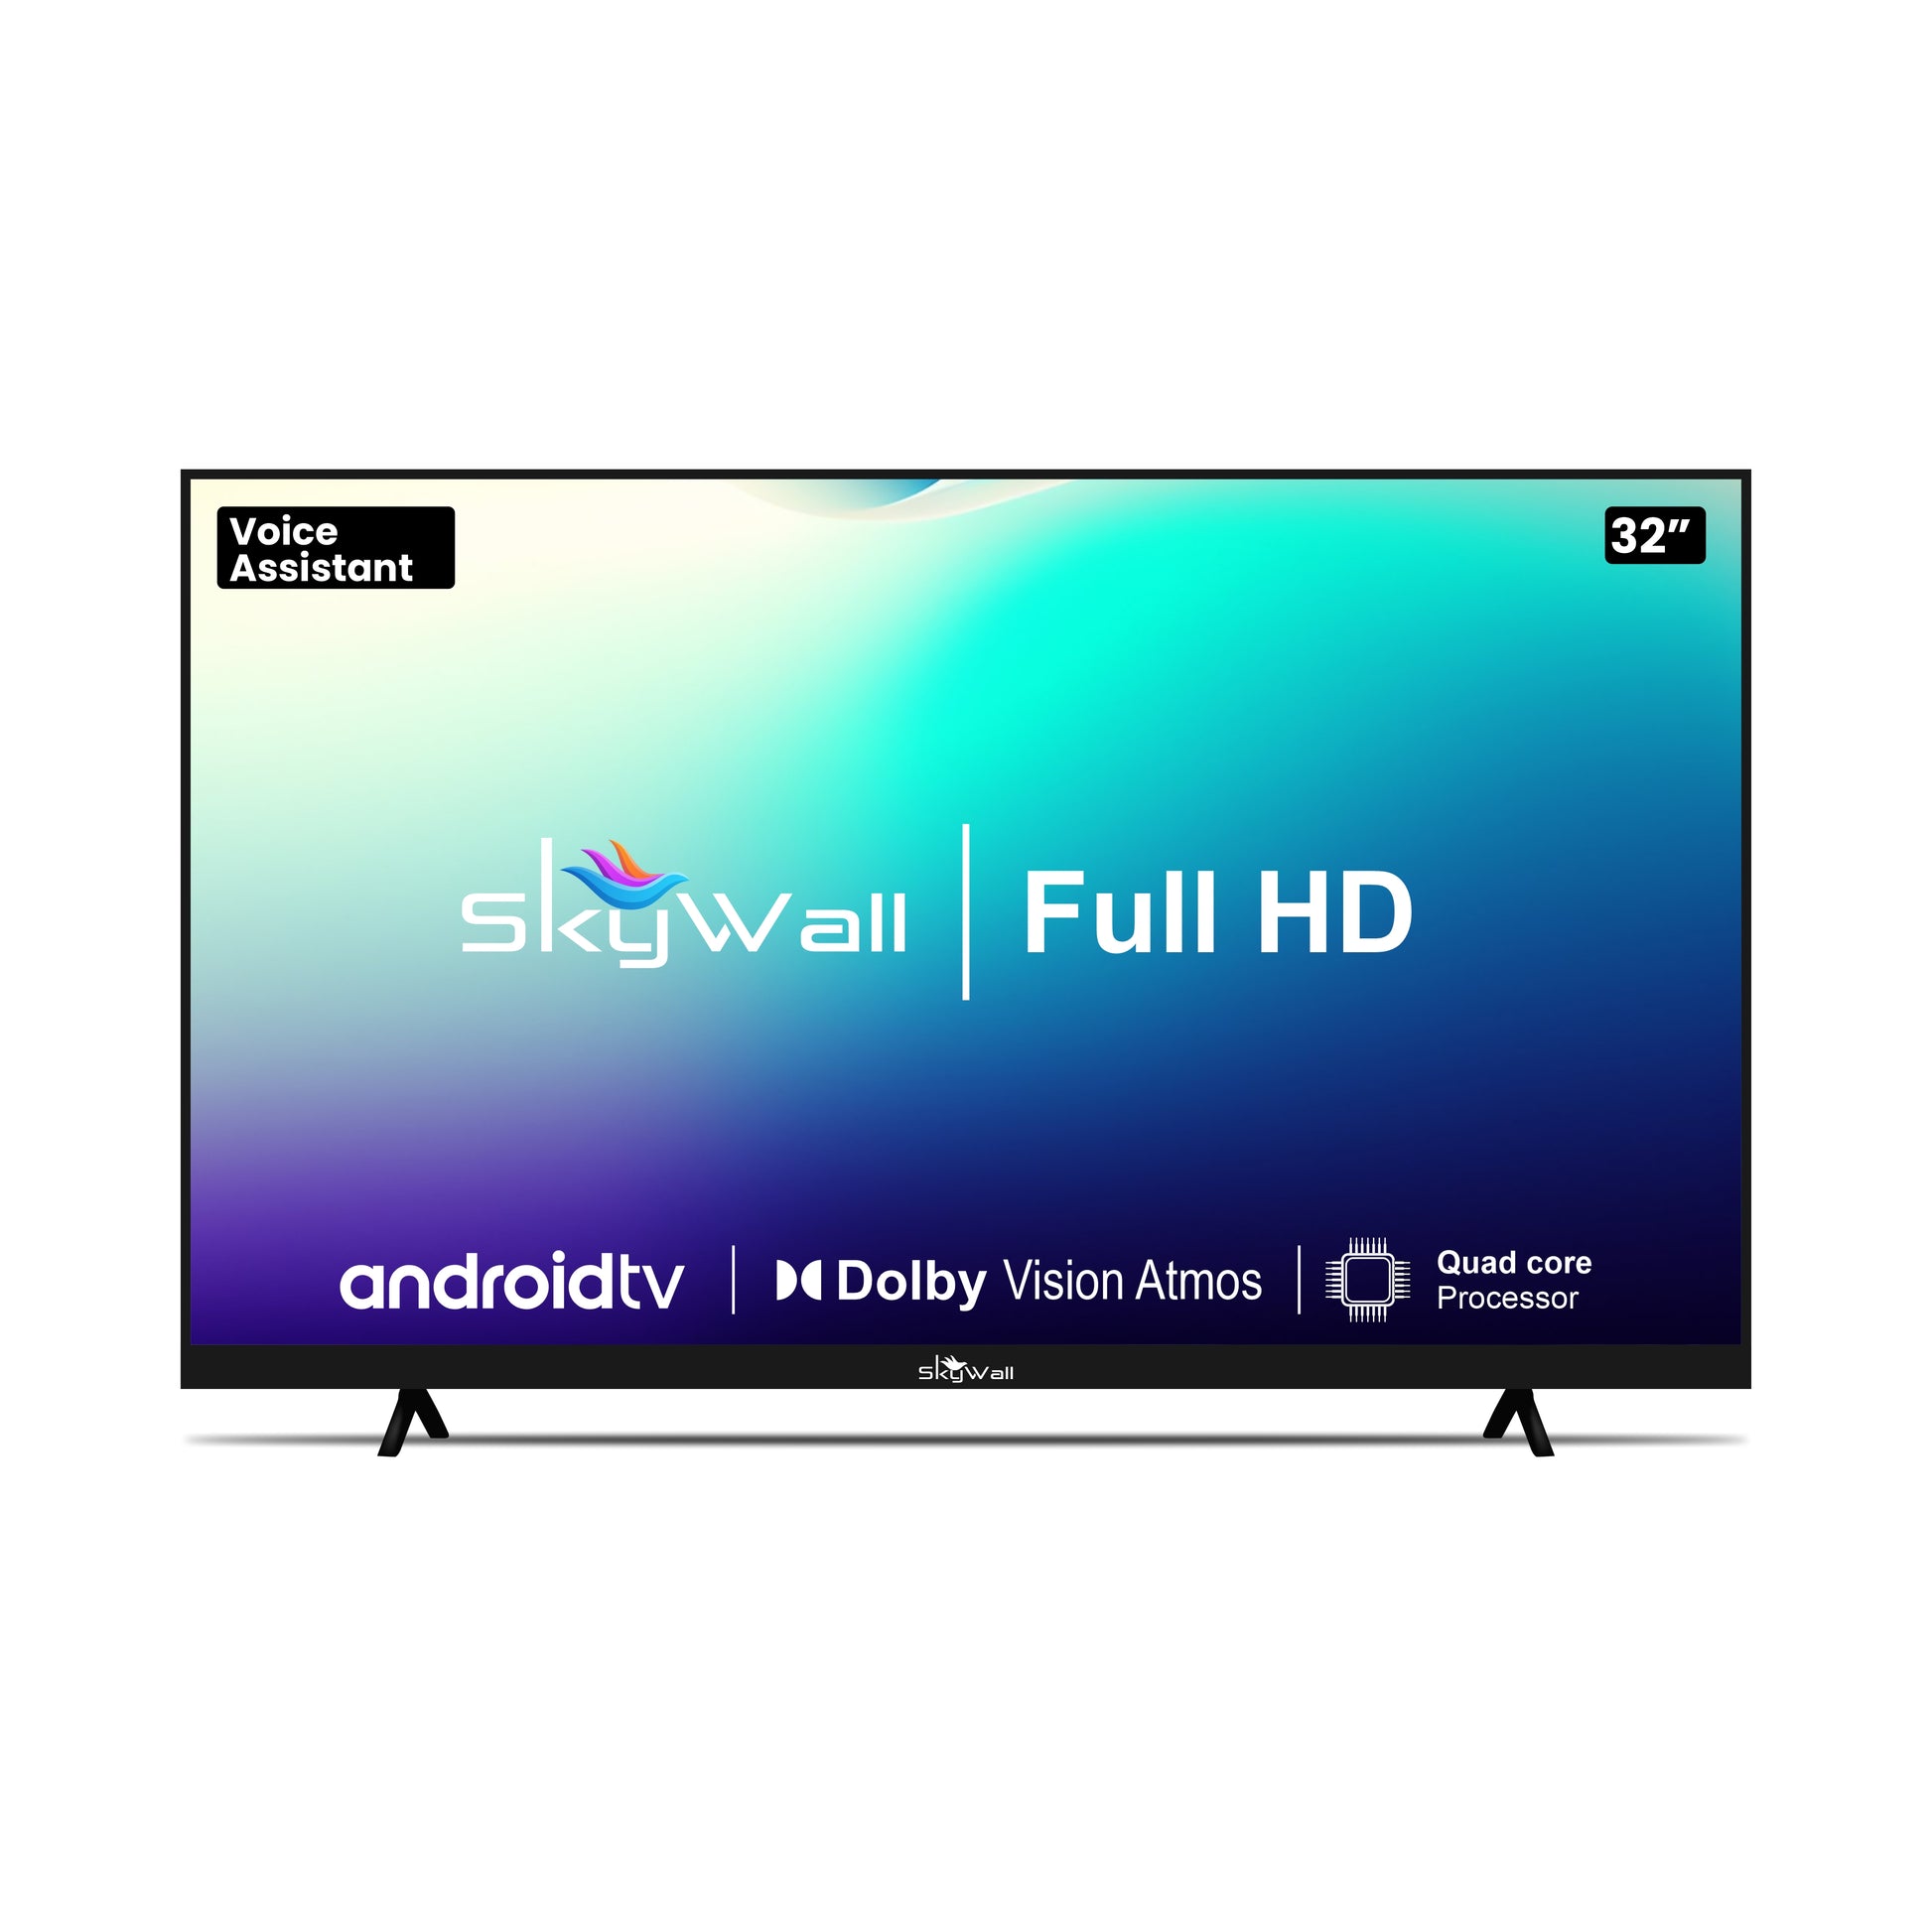 SkyWall™ TV Full HD TV SkyWall 80 cm (32 inches) Full HD Smart LED TV 32SW-Voice (Frameless Edition) | With Voice Assistant